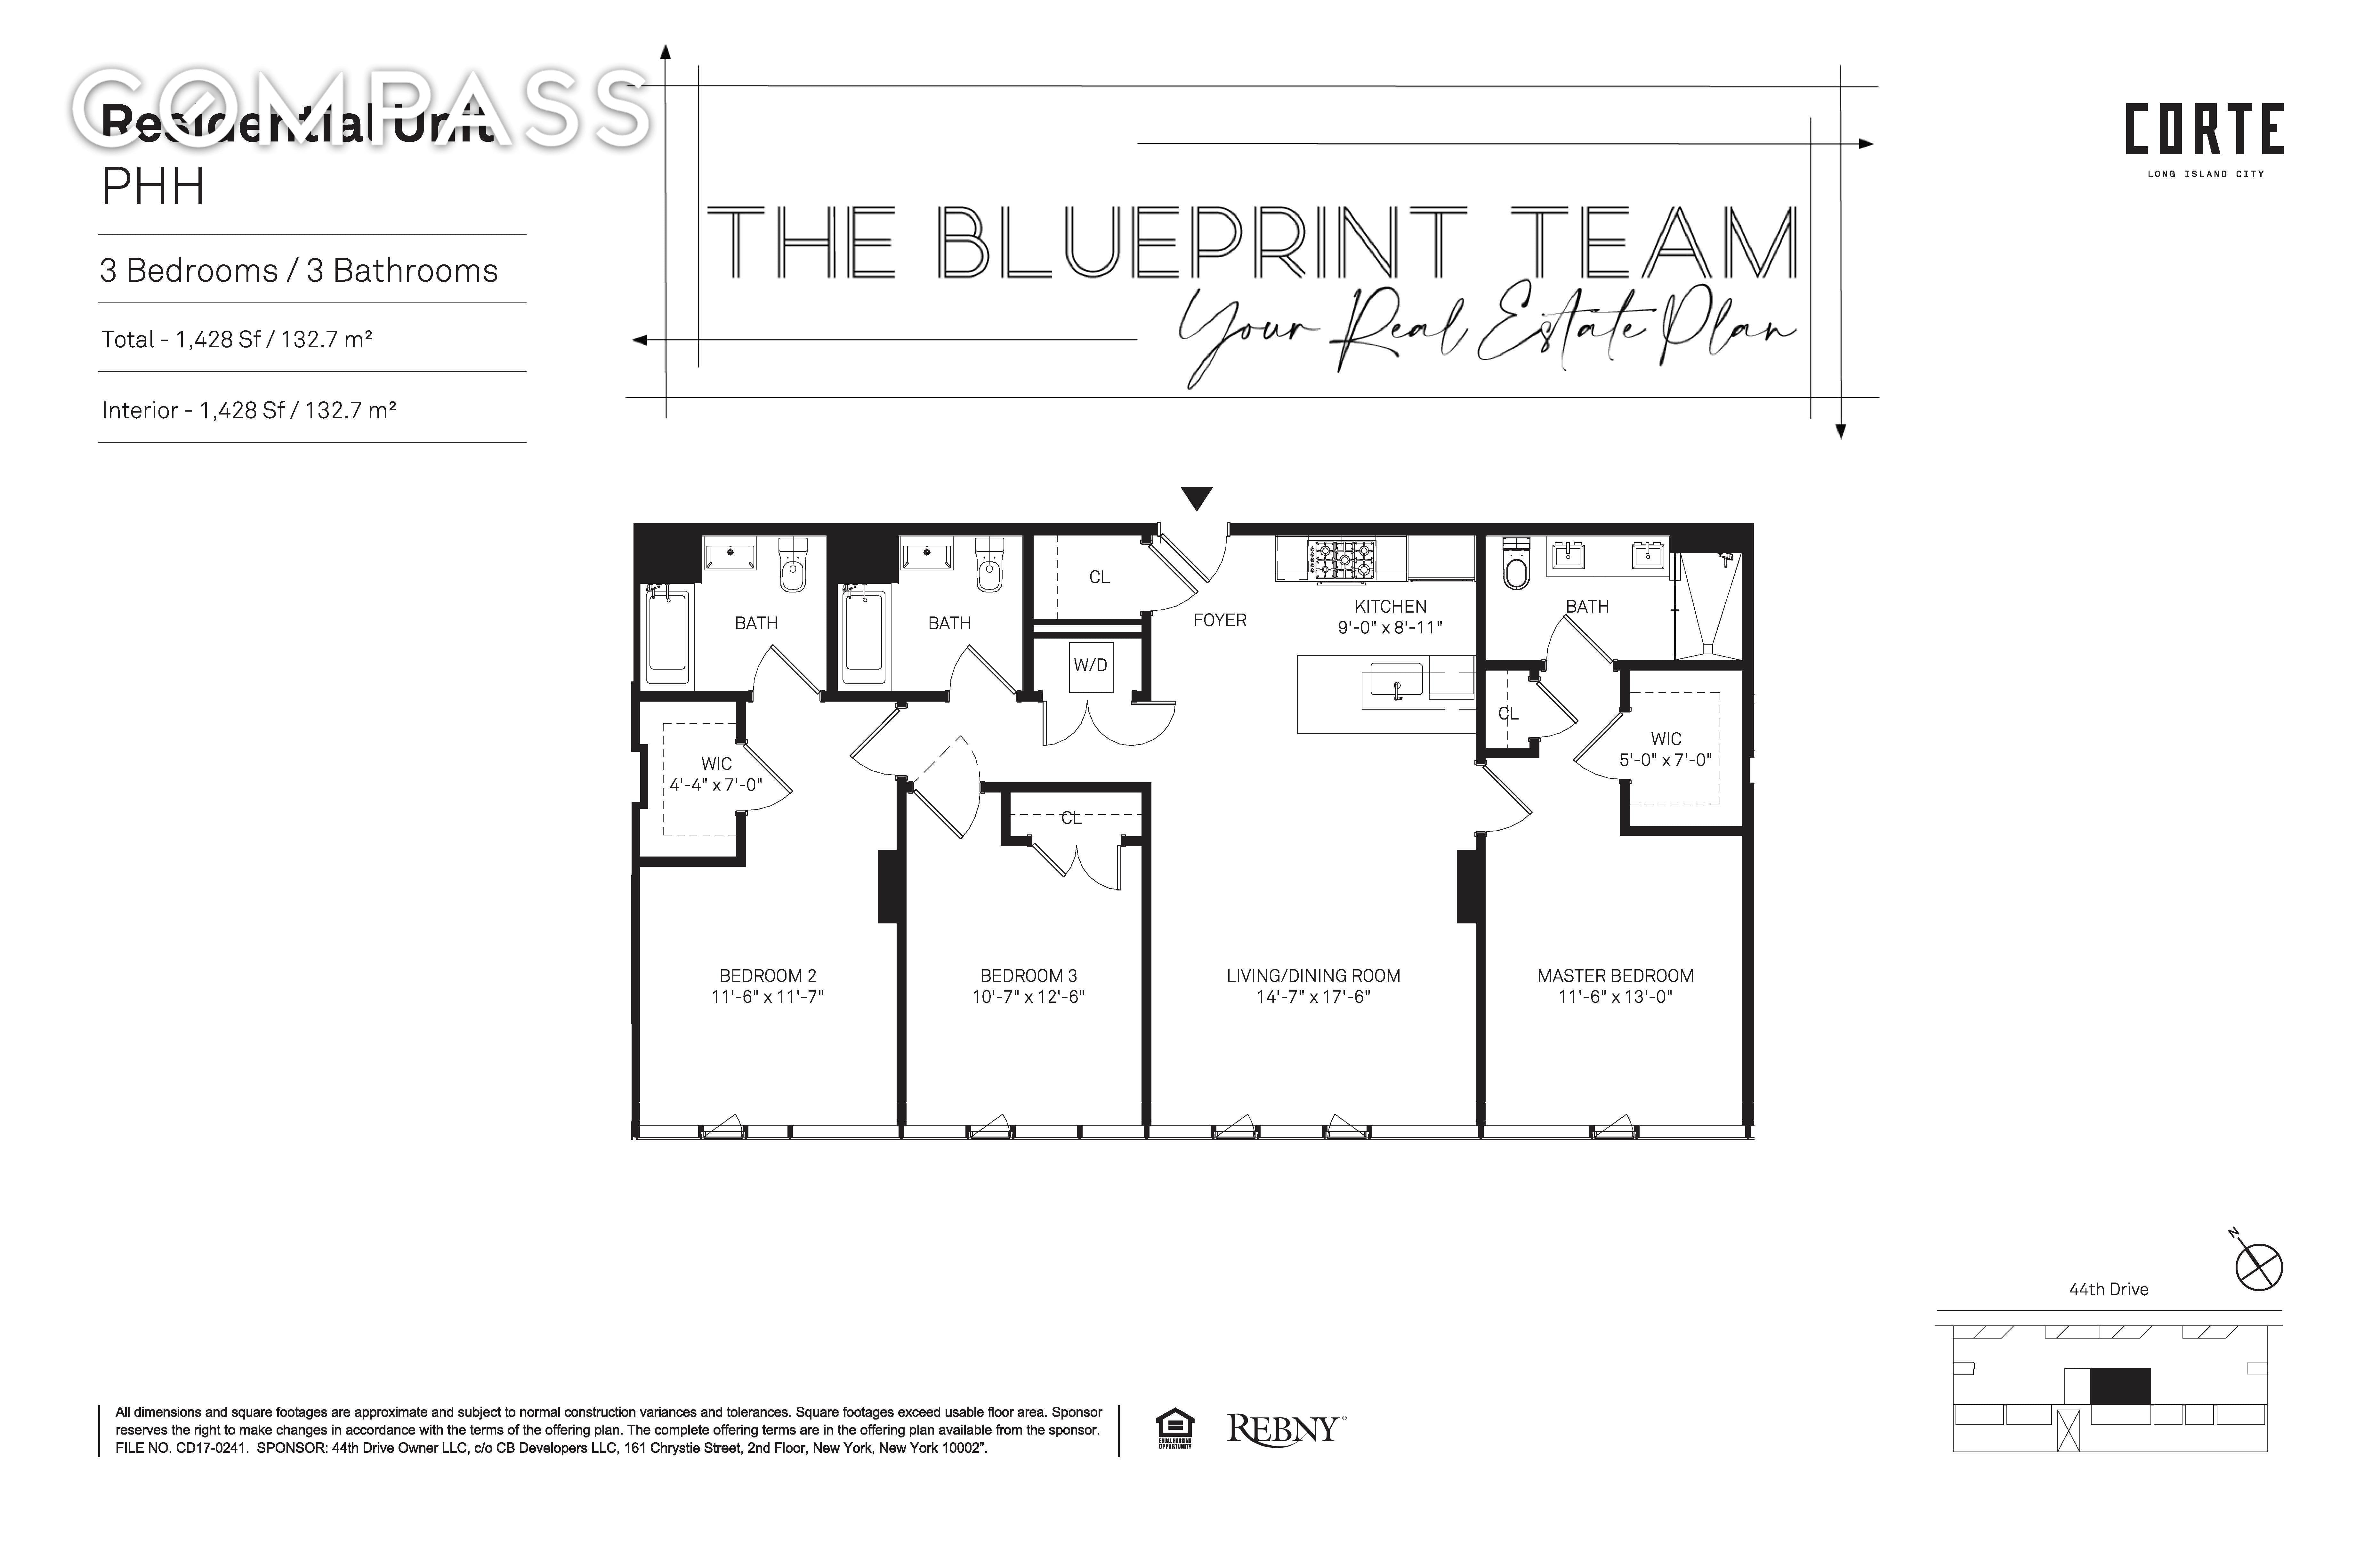 Floor plan of 21-30 44th Drive #PHH in Queens, Long Island City, NY 11101